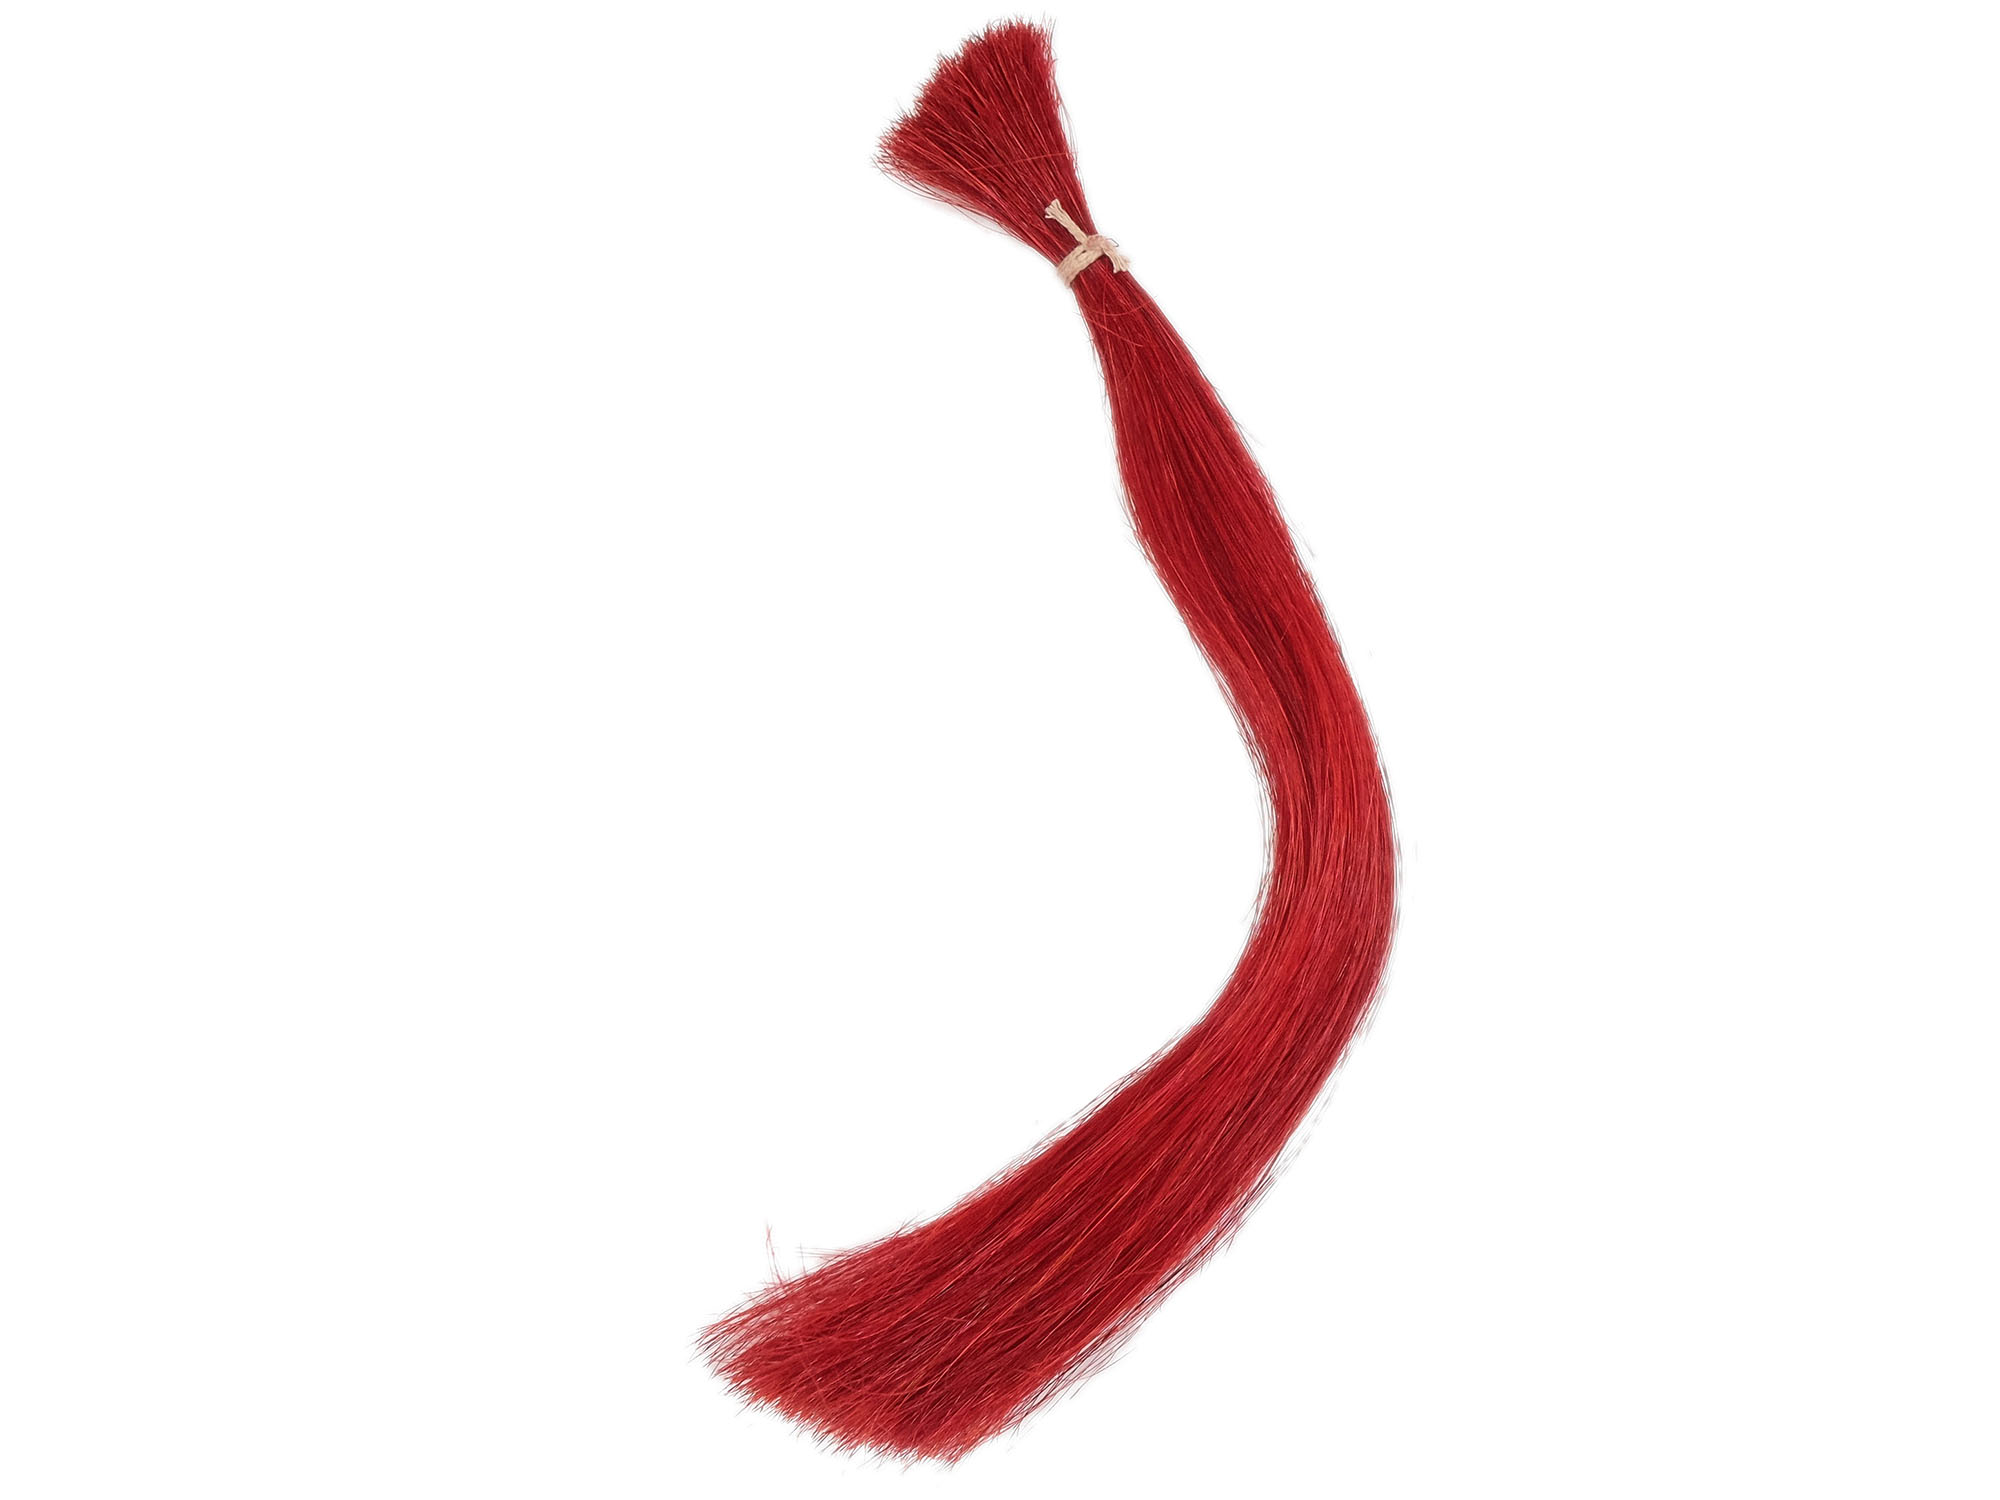 Dyed Horse Tail Hair: Double Drawn: 13-14": Dark Red (oz) 